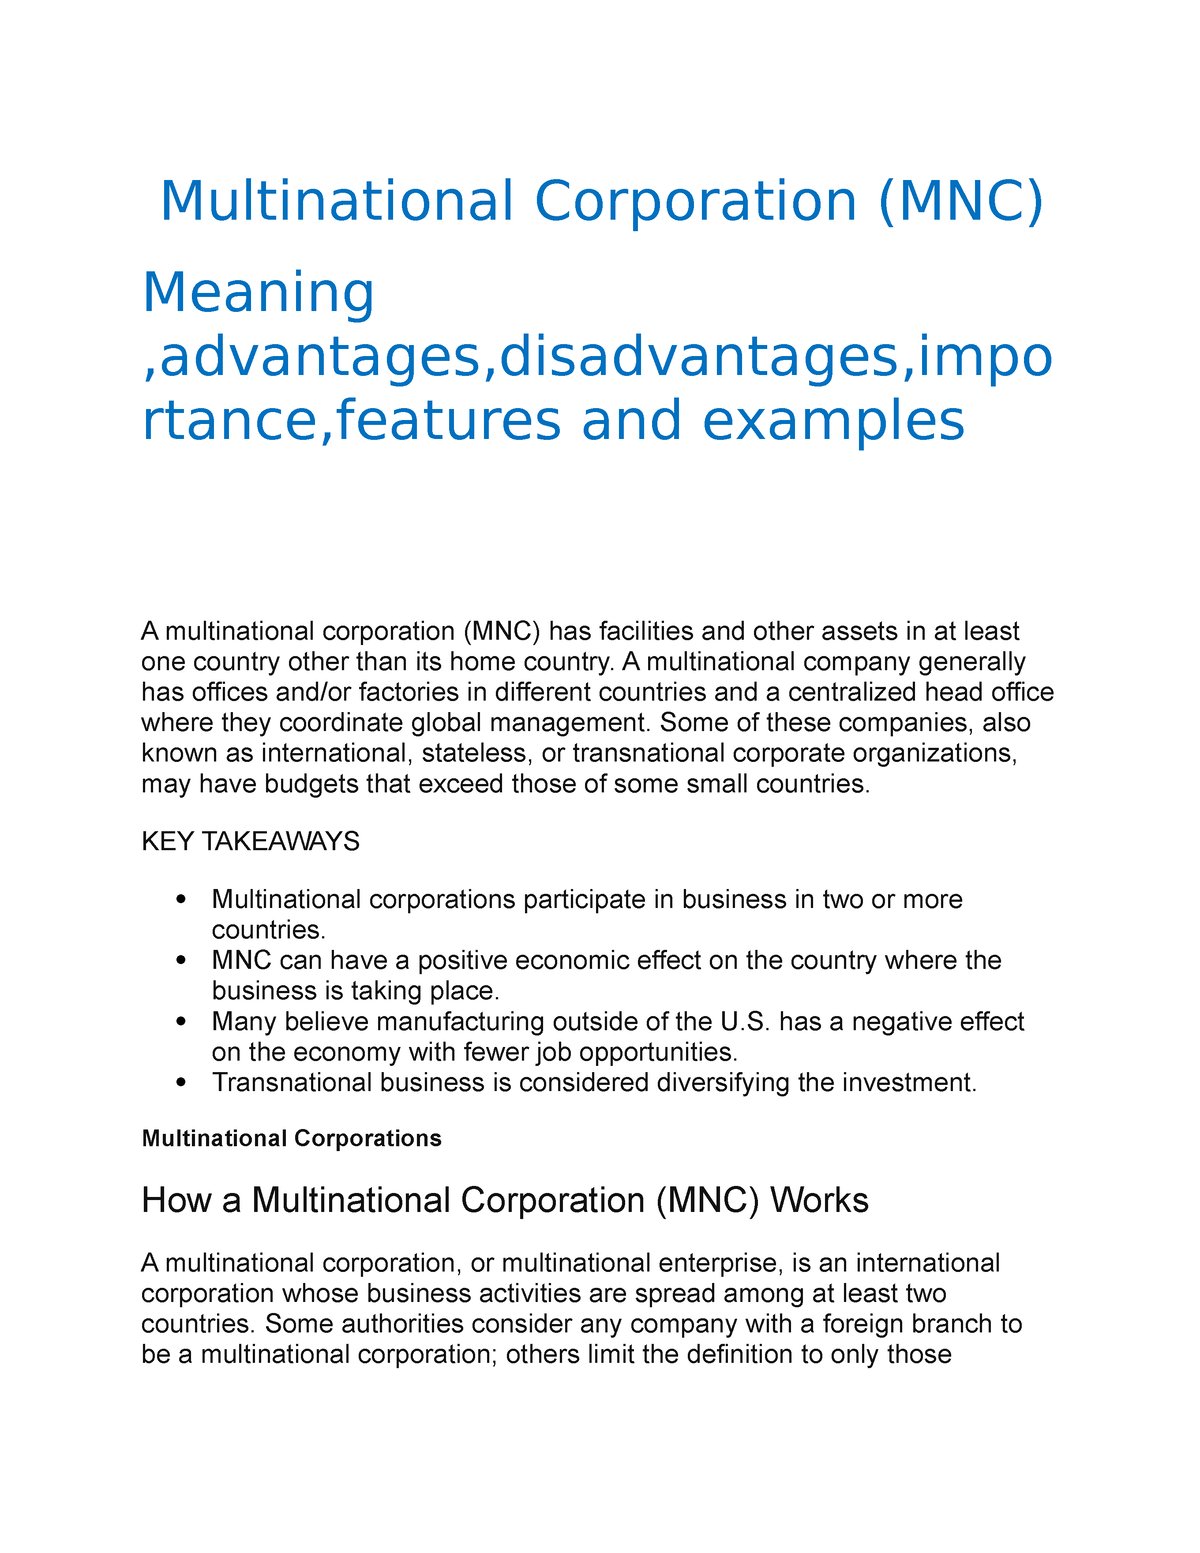 advantages and disadvantages of multinational corporations